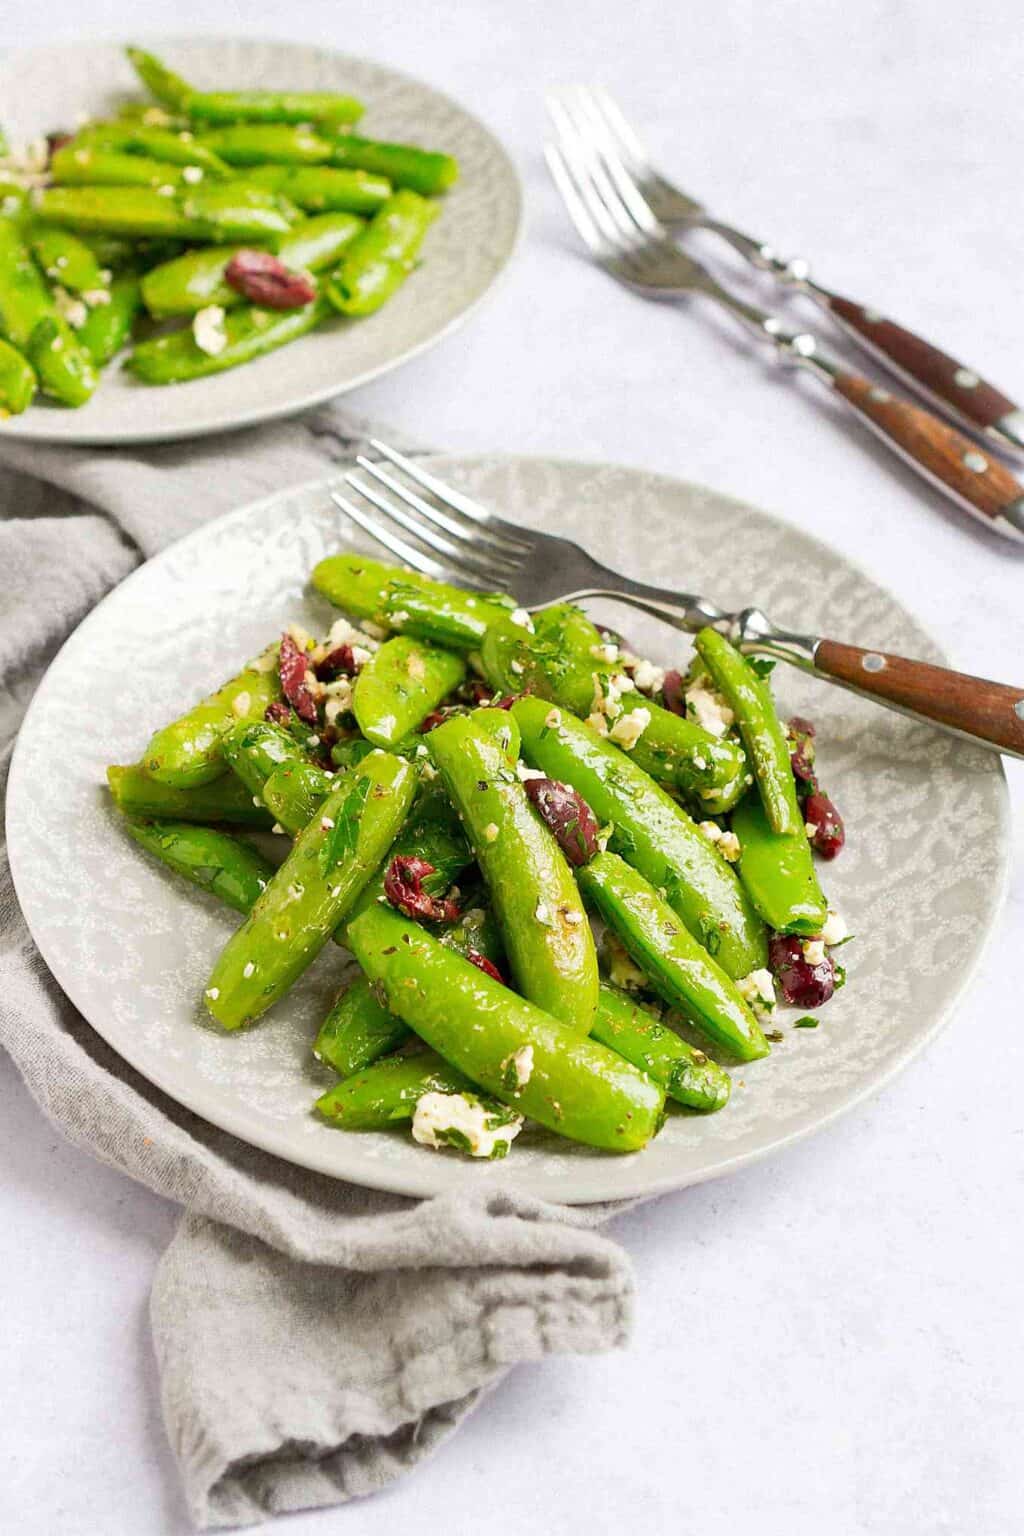 Sauteed sugar snap peas with feta and olives on two gray plates.